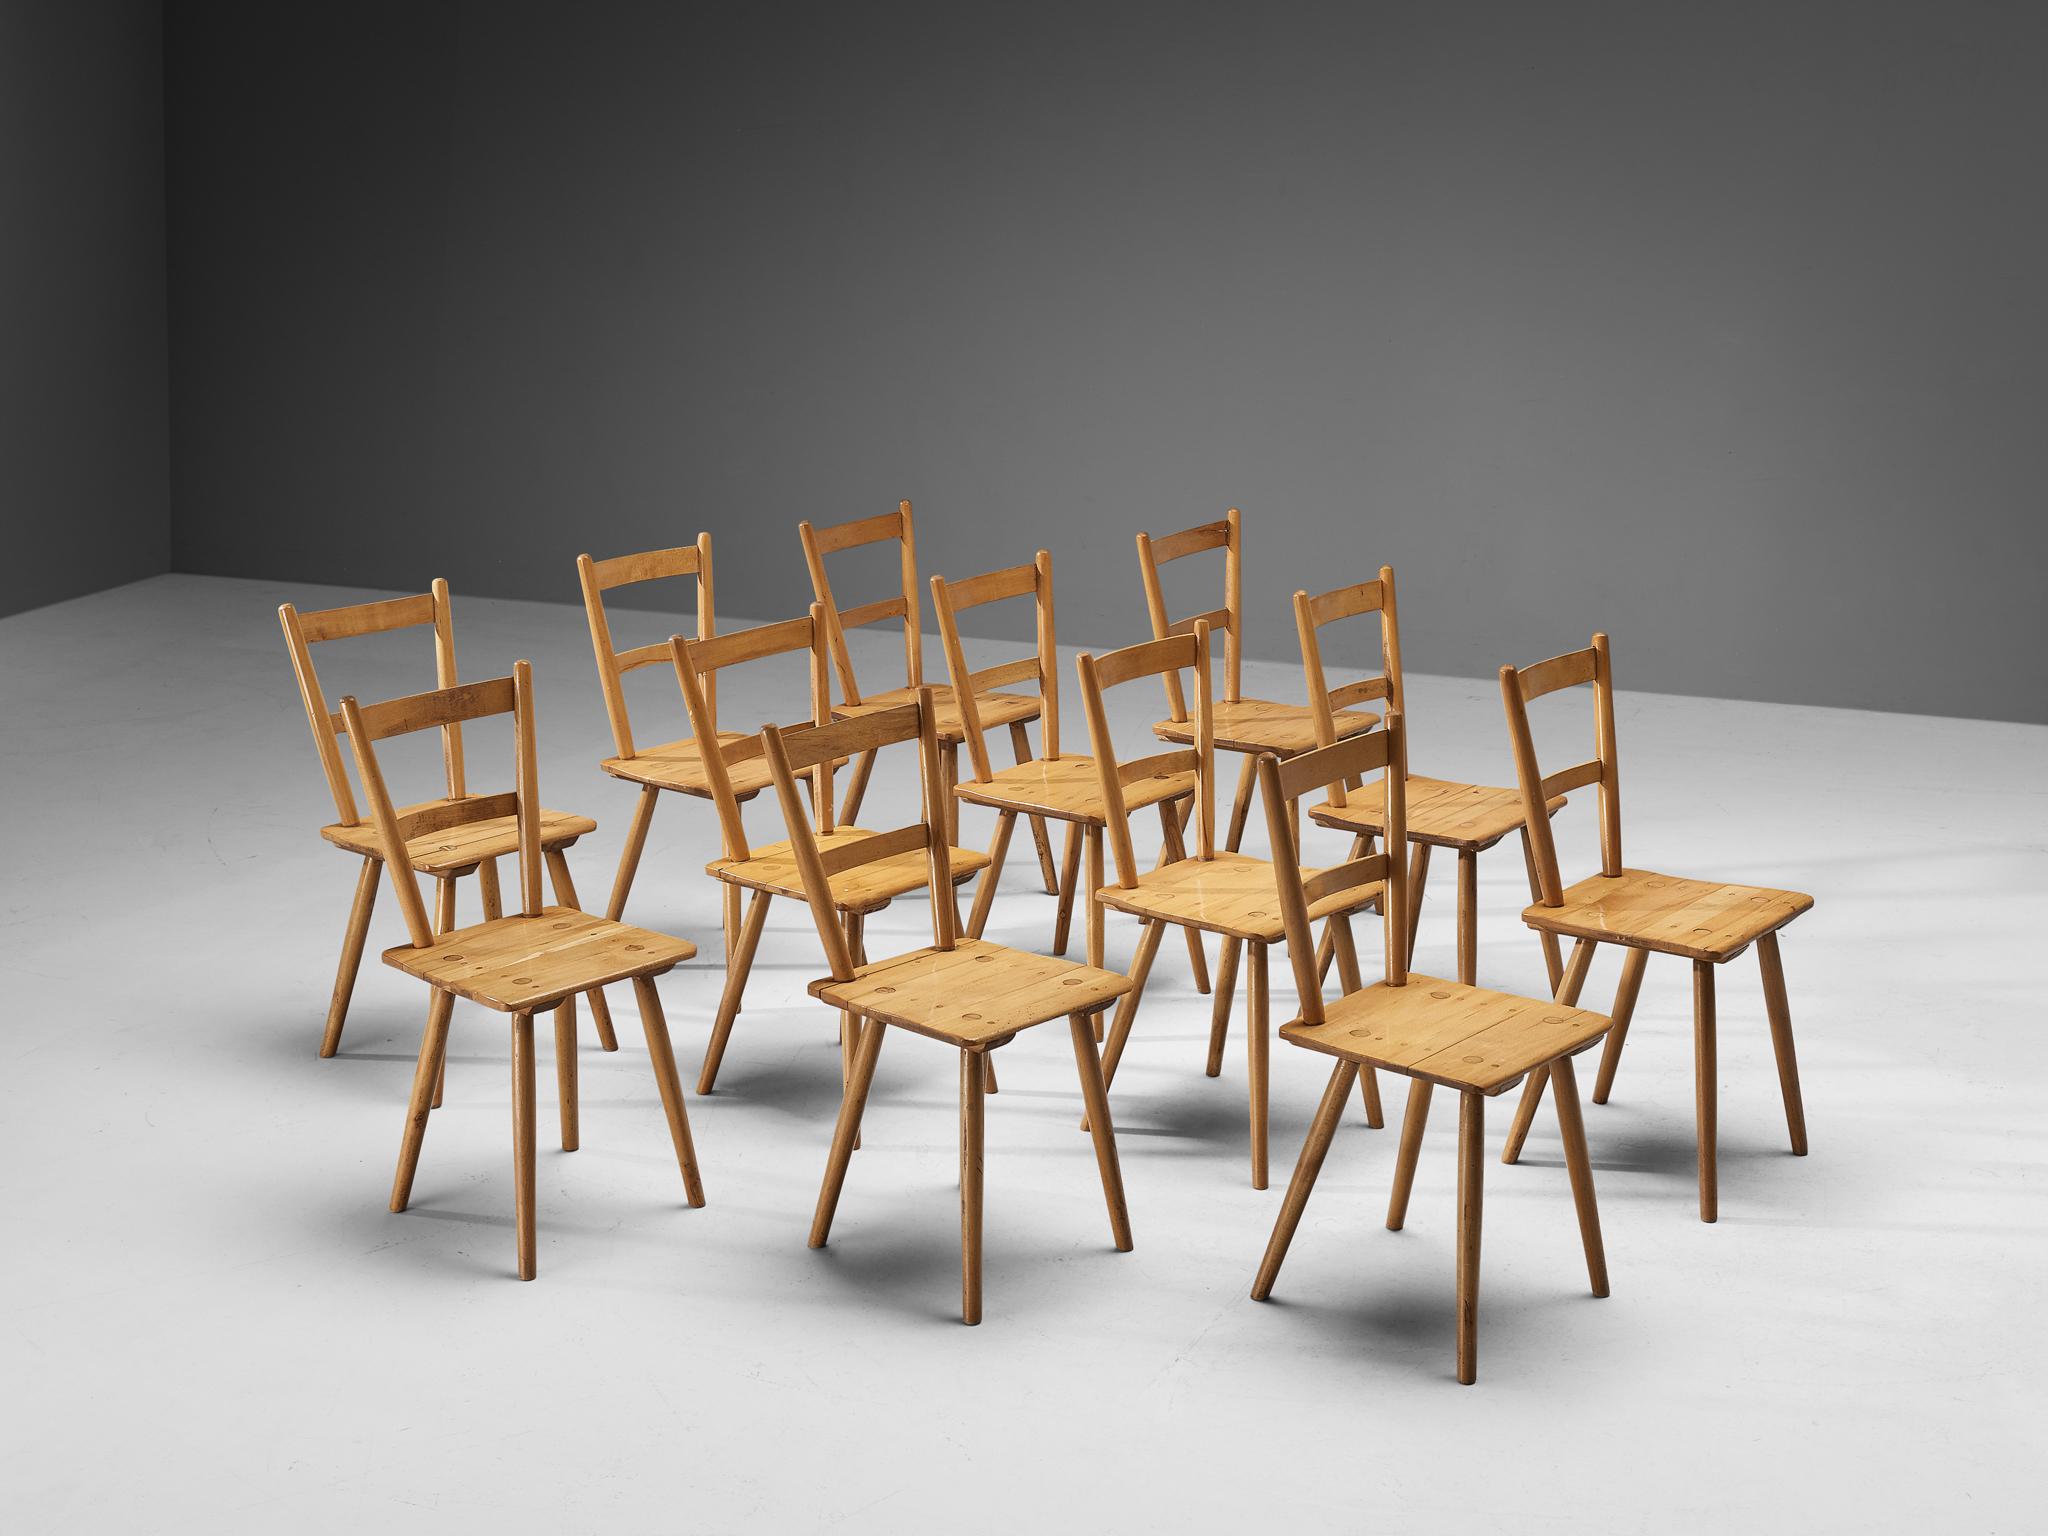 Dining chairs, beech, The Netherlands, 1960s. 

Large set of twelve modest Dutch dining chairs. These modern chairs resemble the style of the designs by the British furniture manufacturer Ercol. These Puritan, simplistic chairs with two horizontal